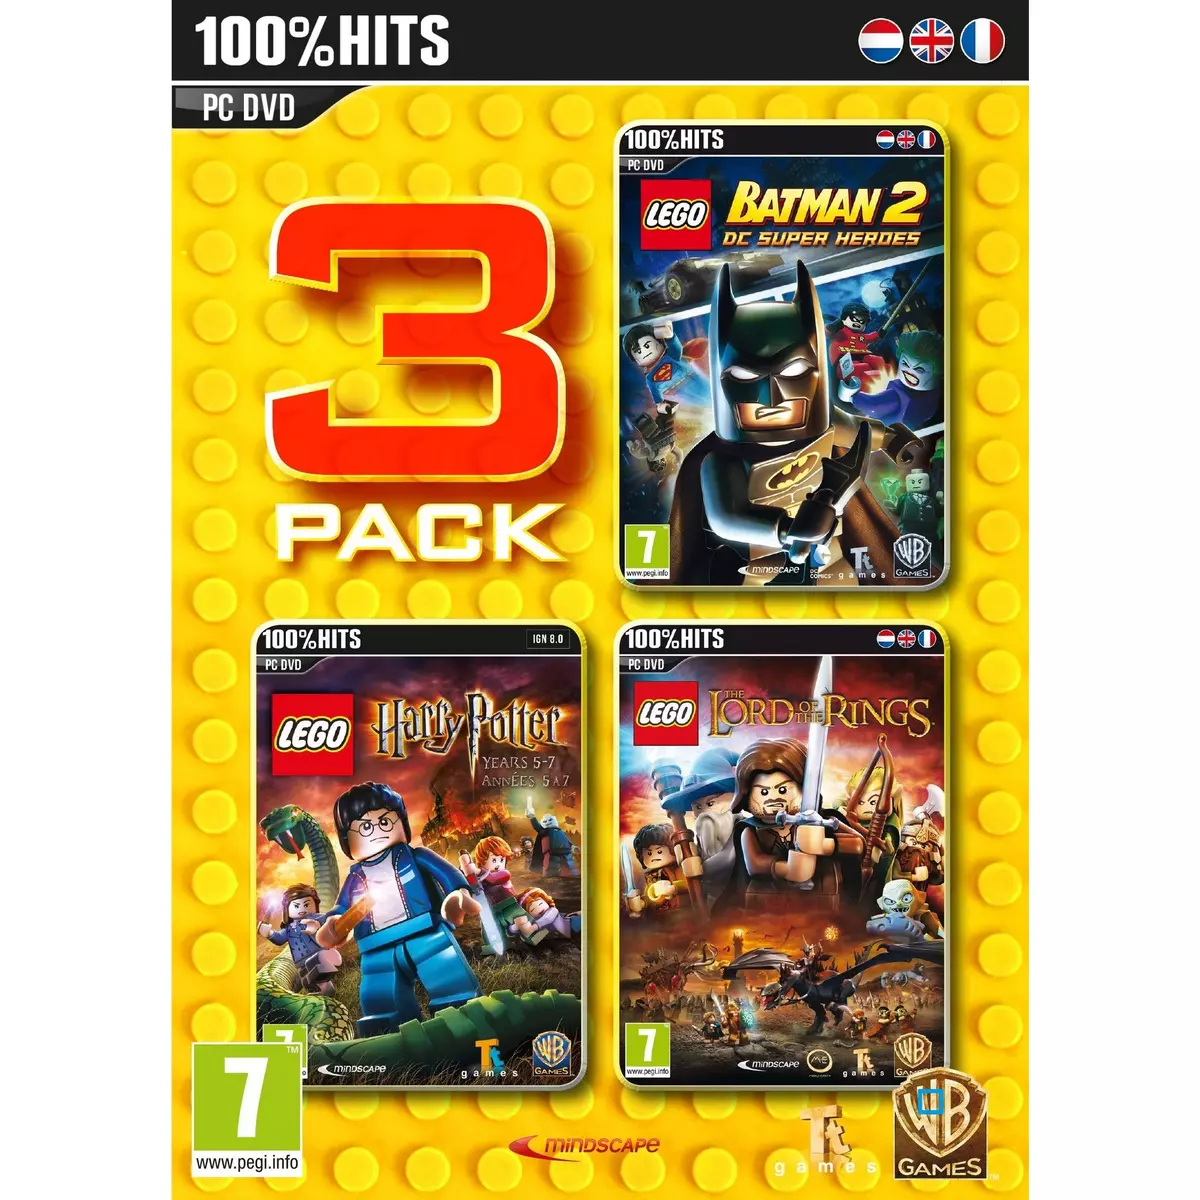 LEGO 3 Pack (Lord of the Rings + Batman 2 + Harry Potter 5-7) - PC